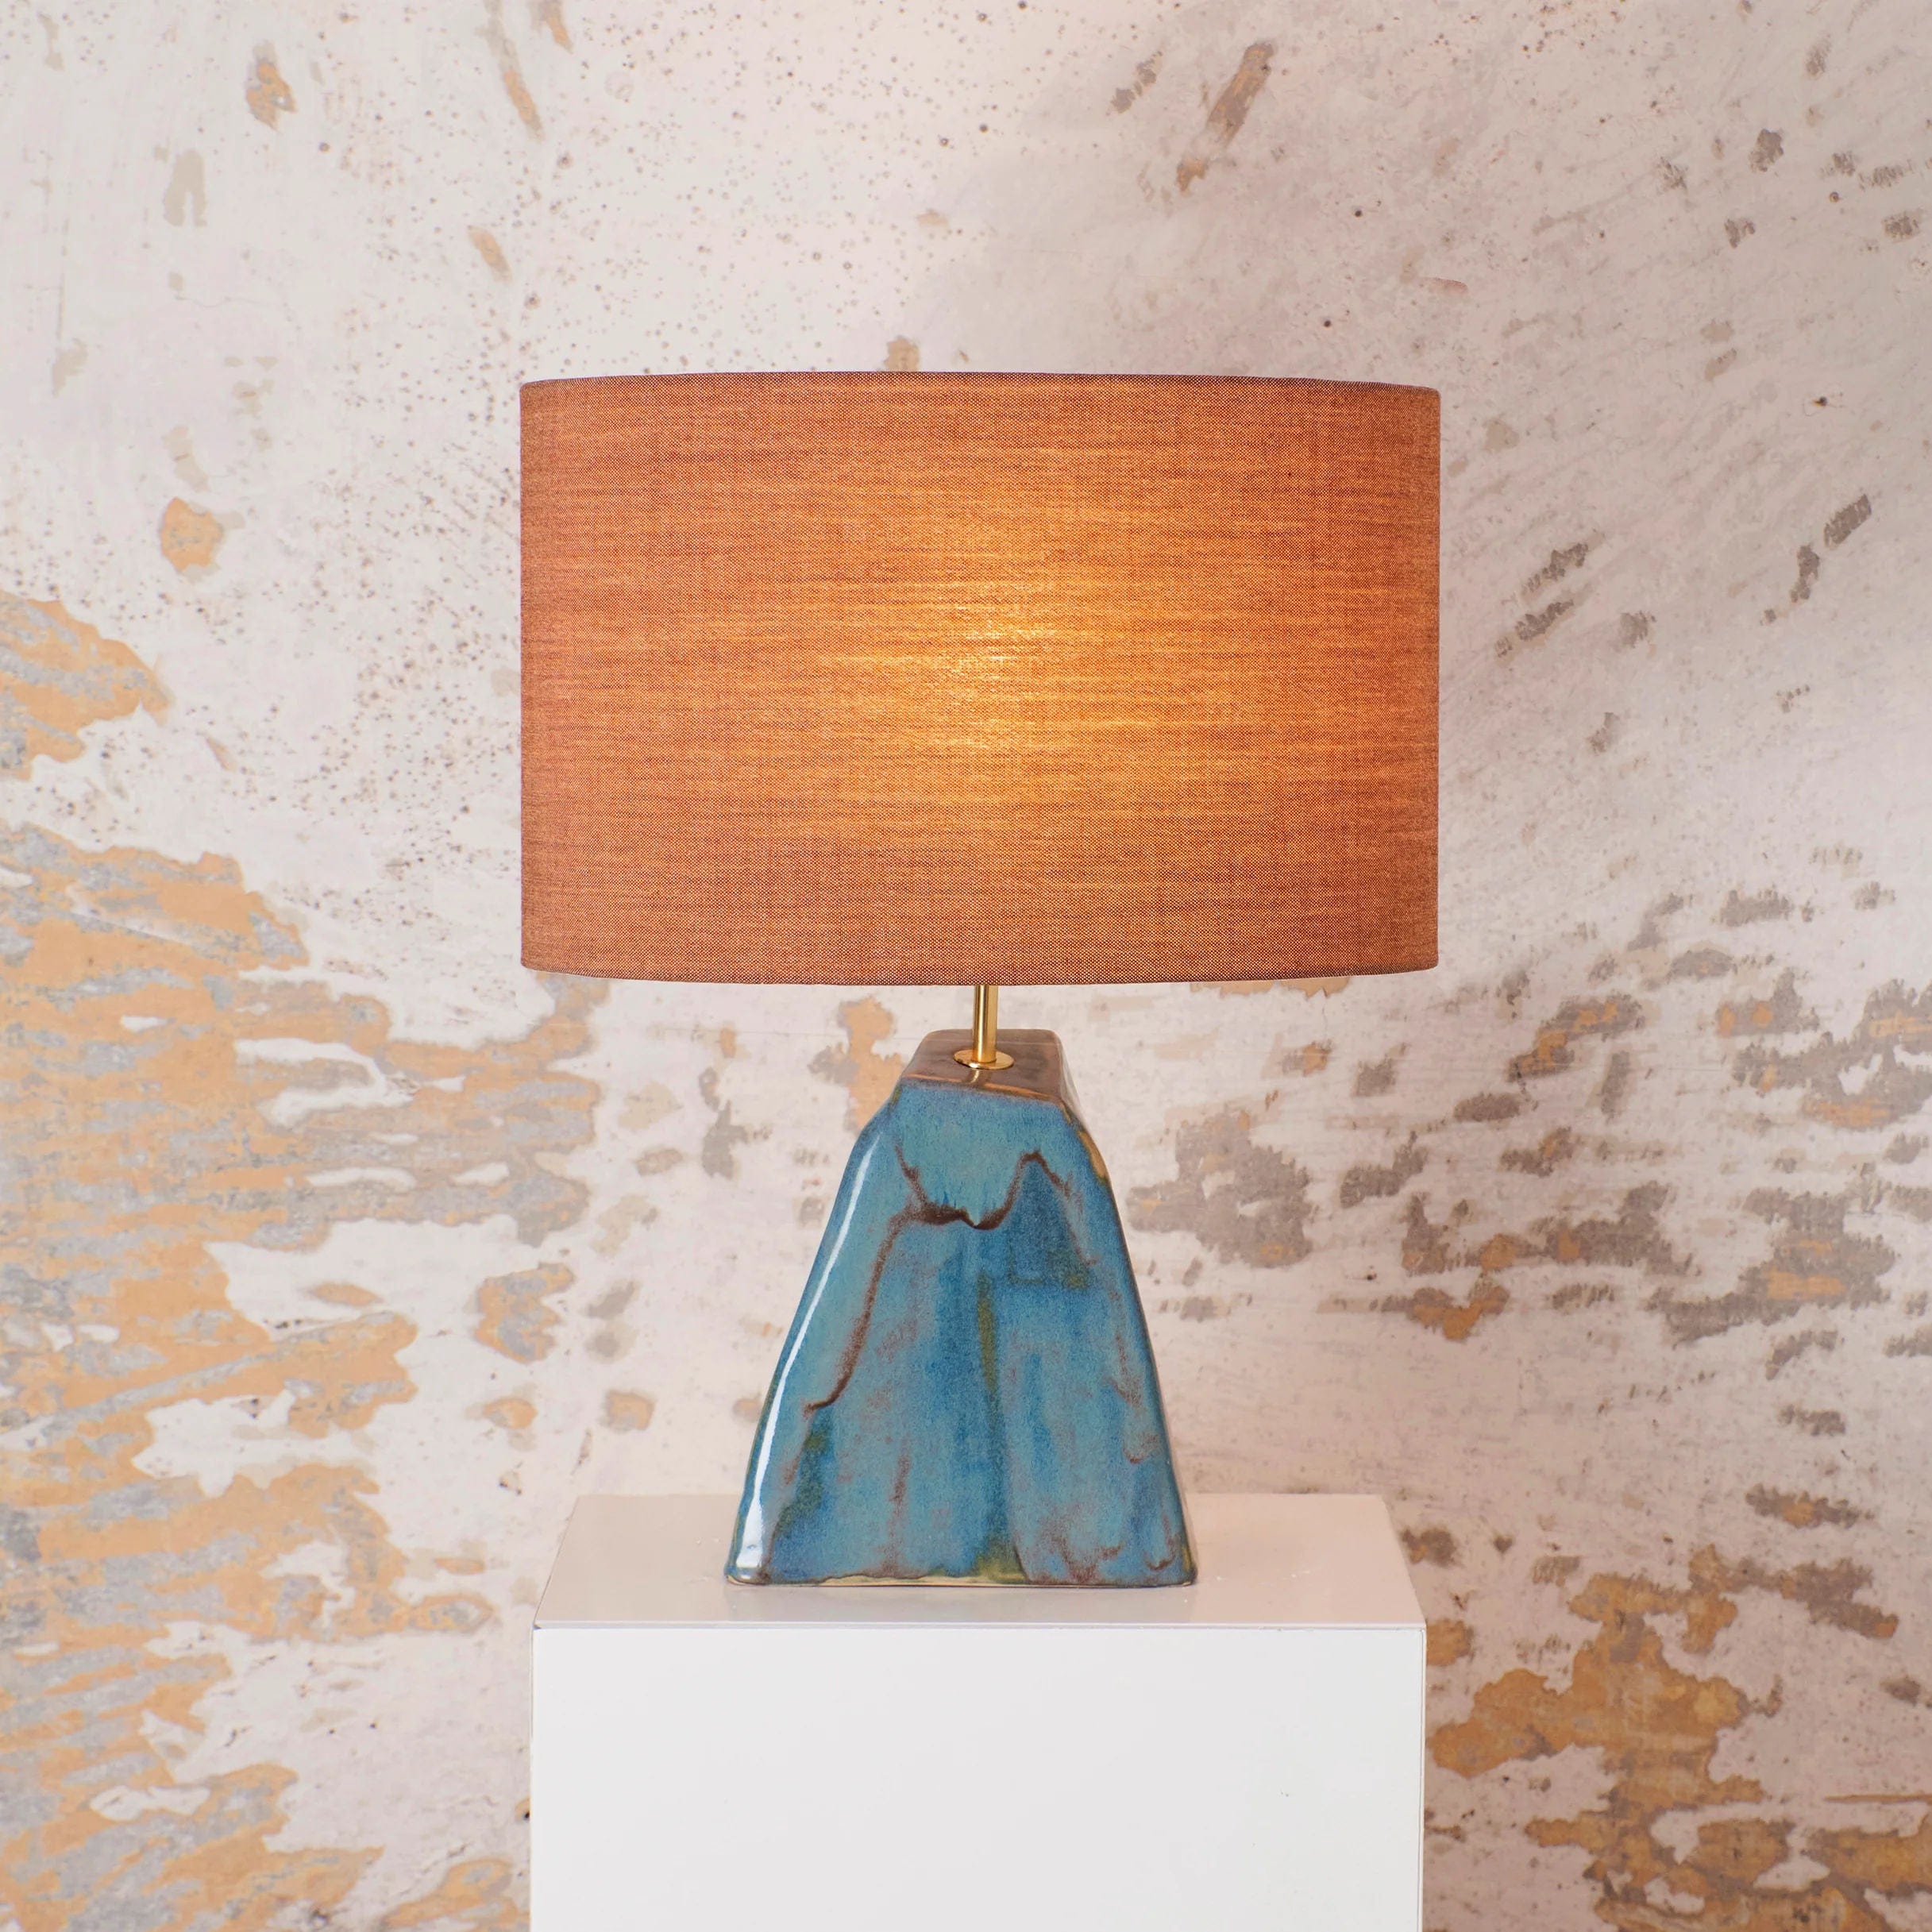 A stylish Triangular Ceramic Lamp by Project 213A with a blue and teal ceramic base and a cylindrical orange shade, illuminated and placed on a white pedestal against a textured beige wall, showcasing artisanal craftsmanship.